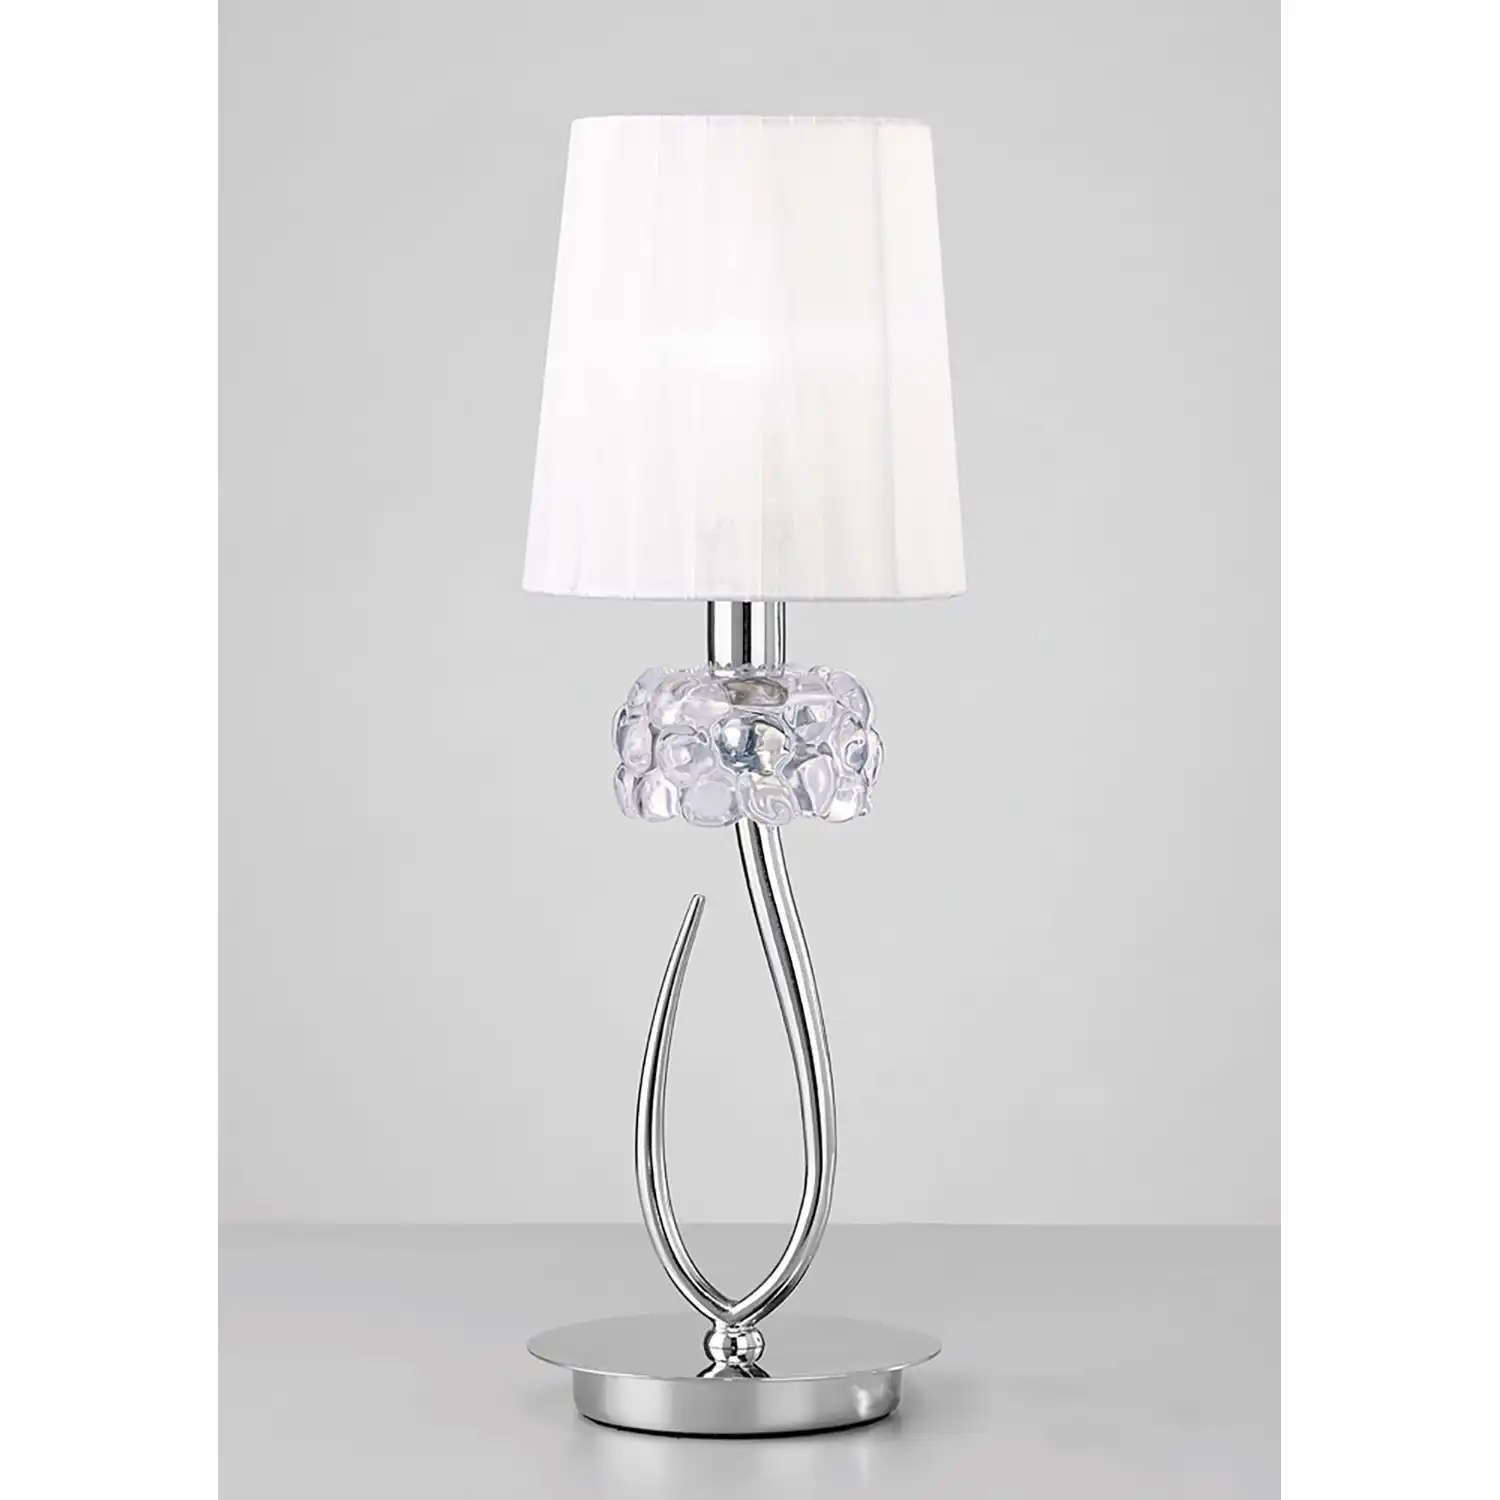 Loewe Table Lamp 1 Light E14 Small, Polished Chrome With White Shade